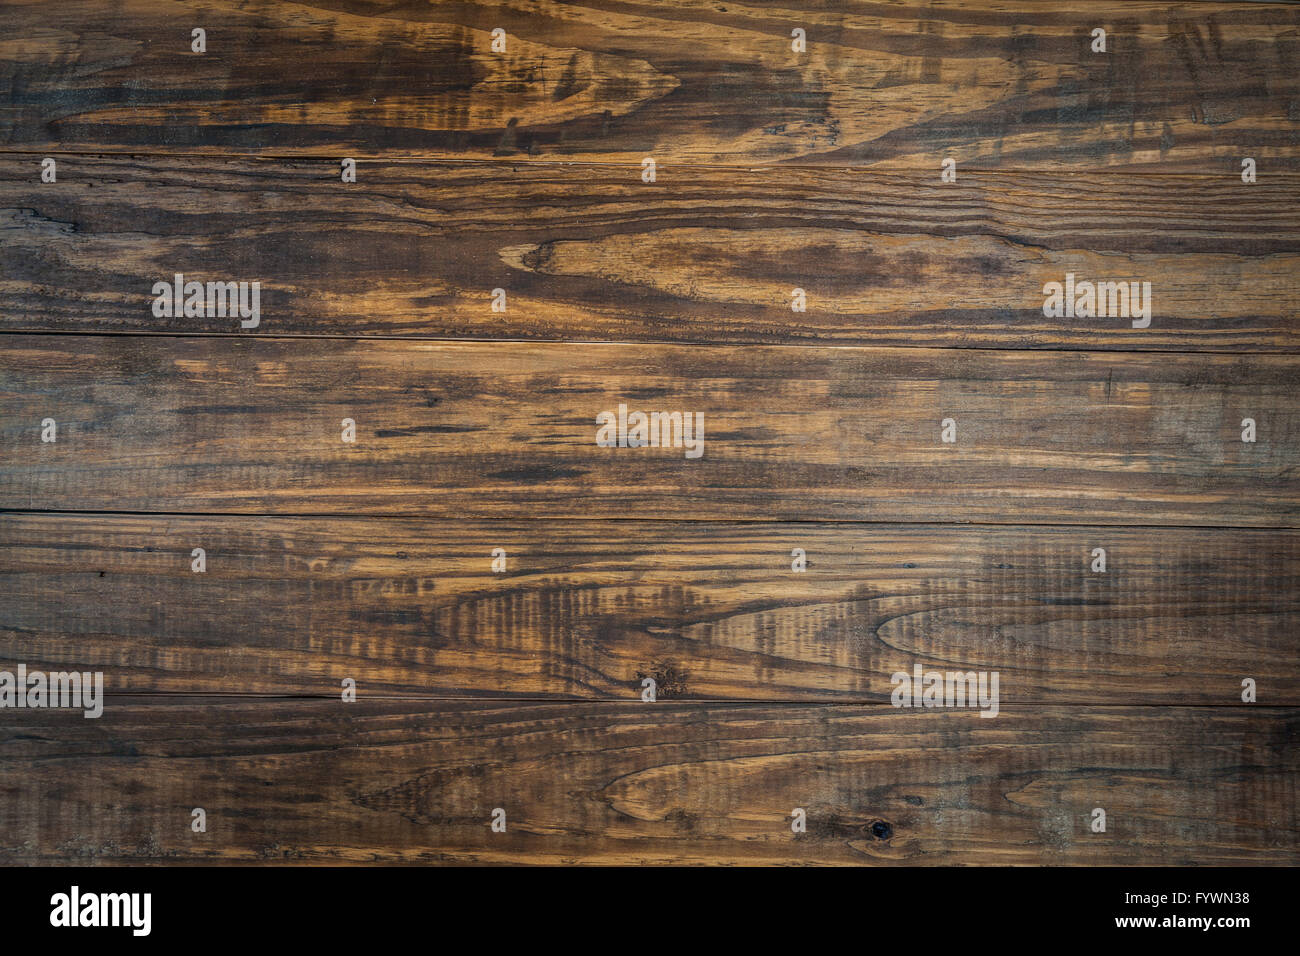 Natural wood texture planks background Stock Photo